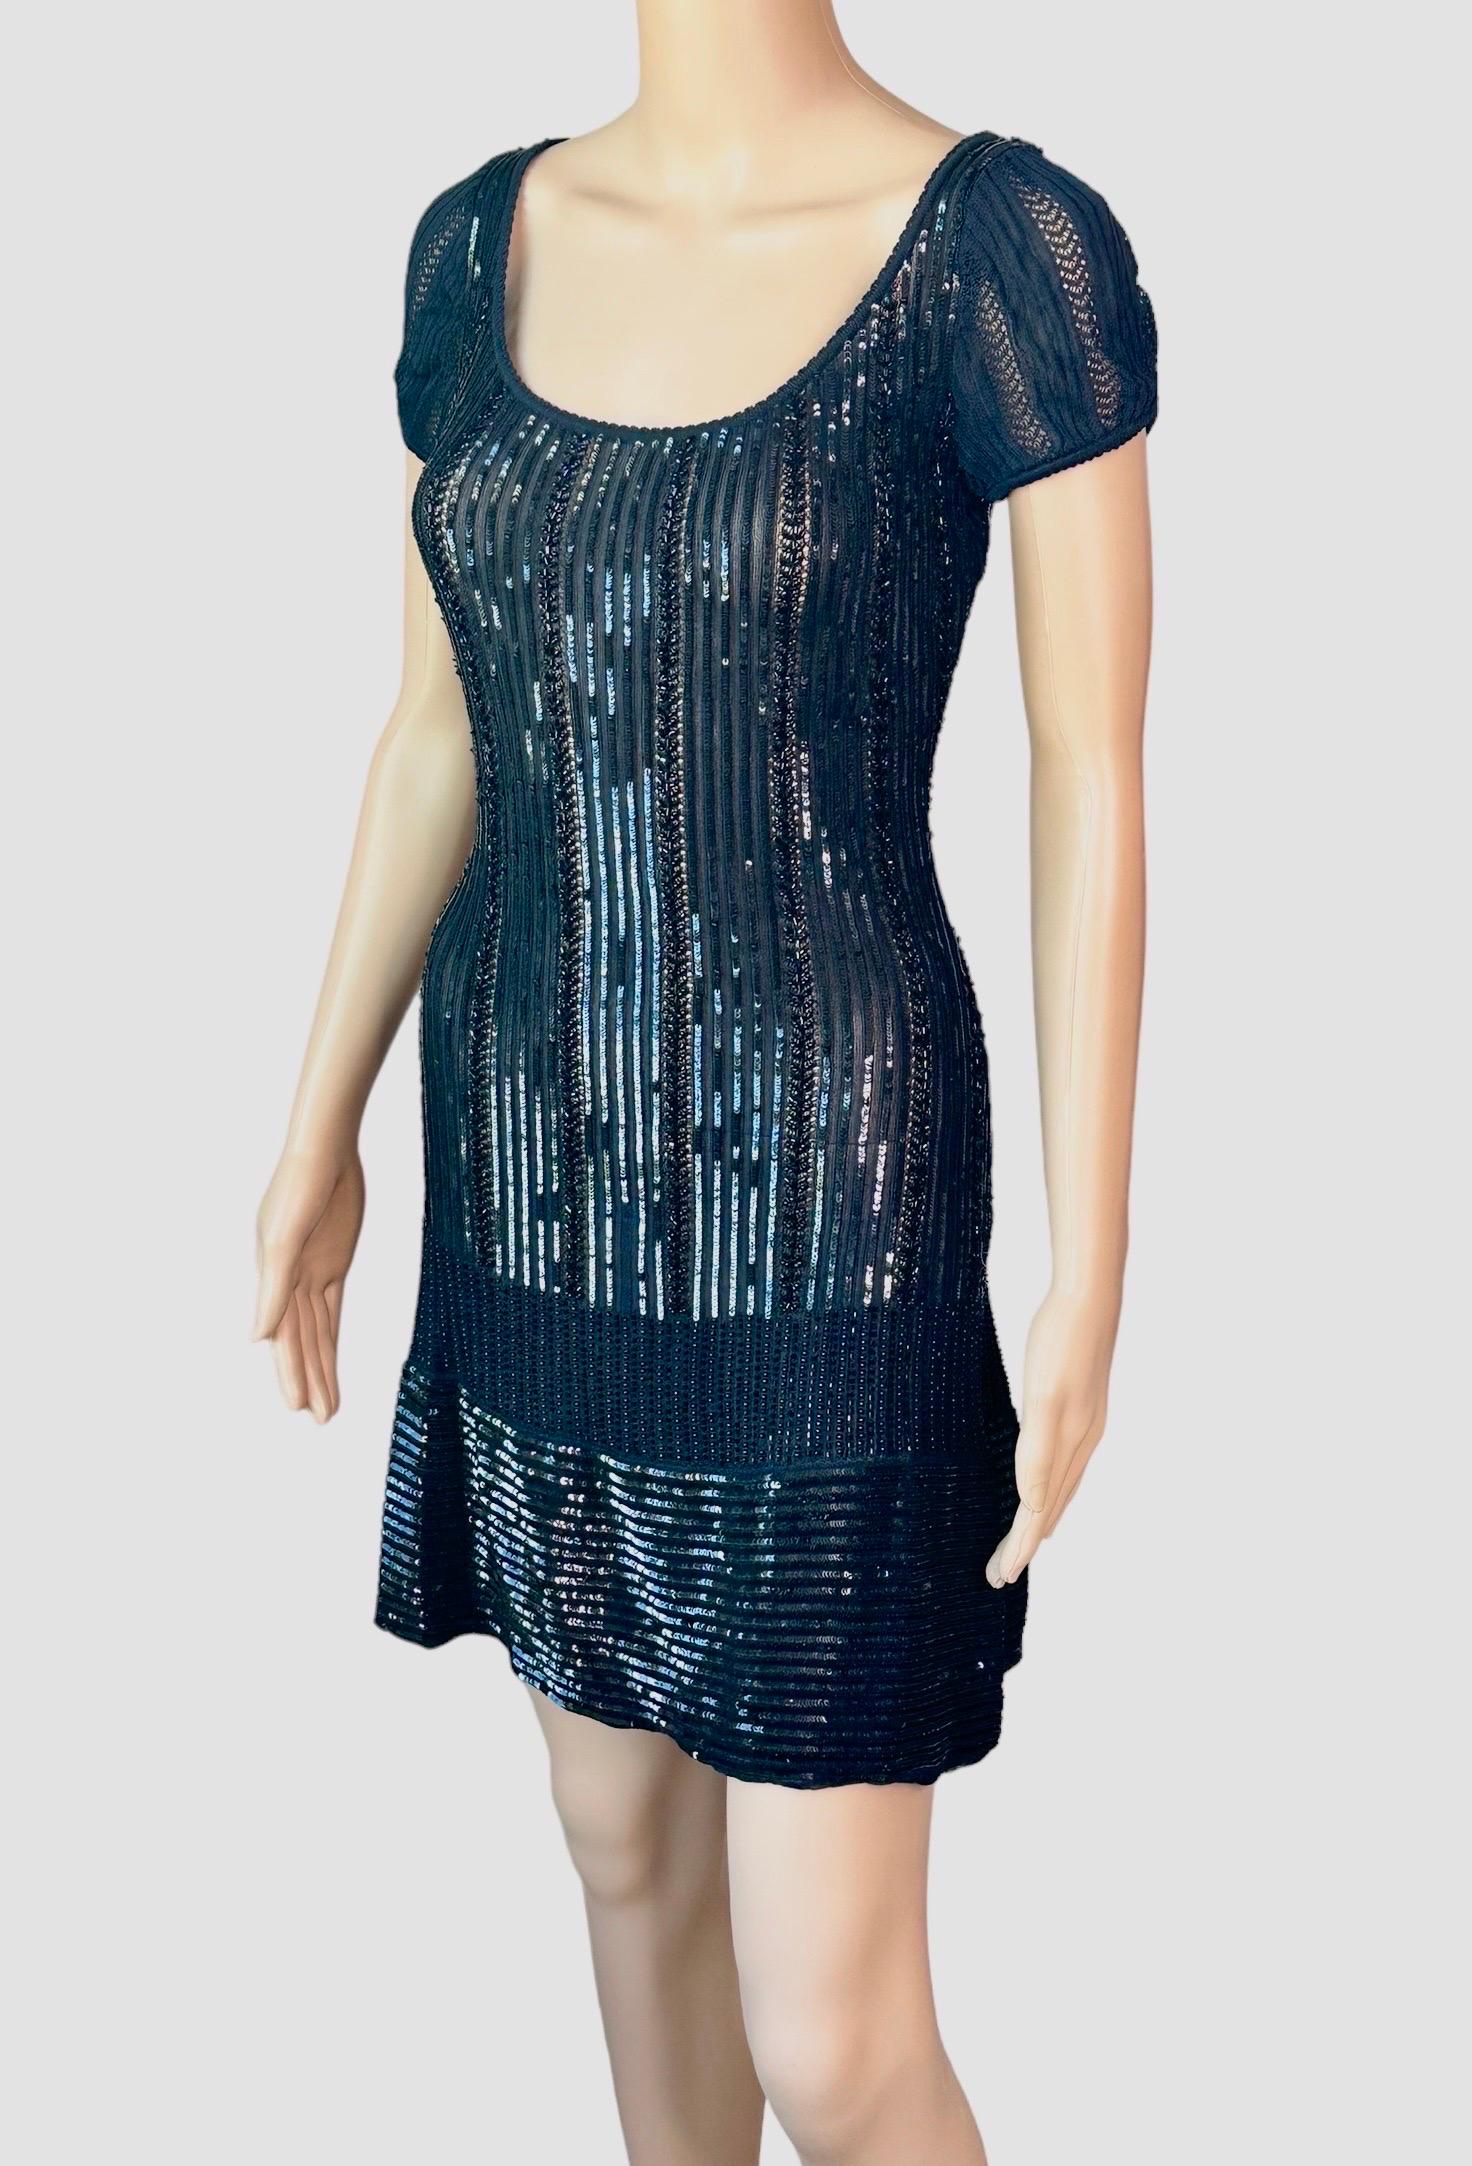 Azzedine Alaia Vintage S/S 1996 Black Sequin Embellished Mini Dress In Good Condition For Sale In Naples, FL